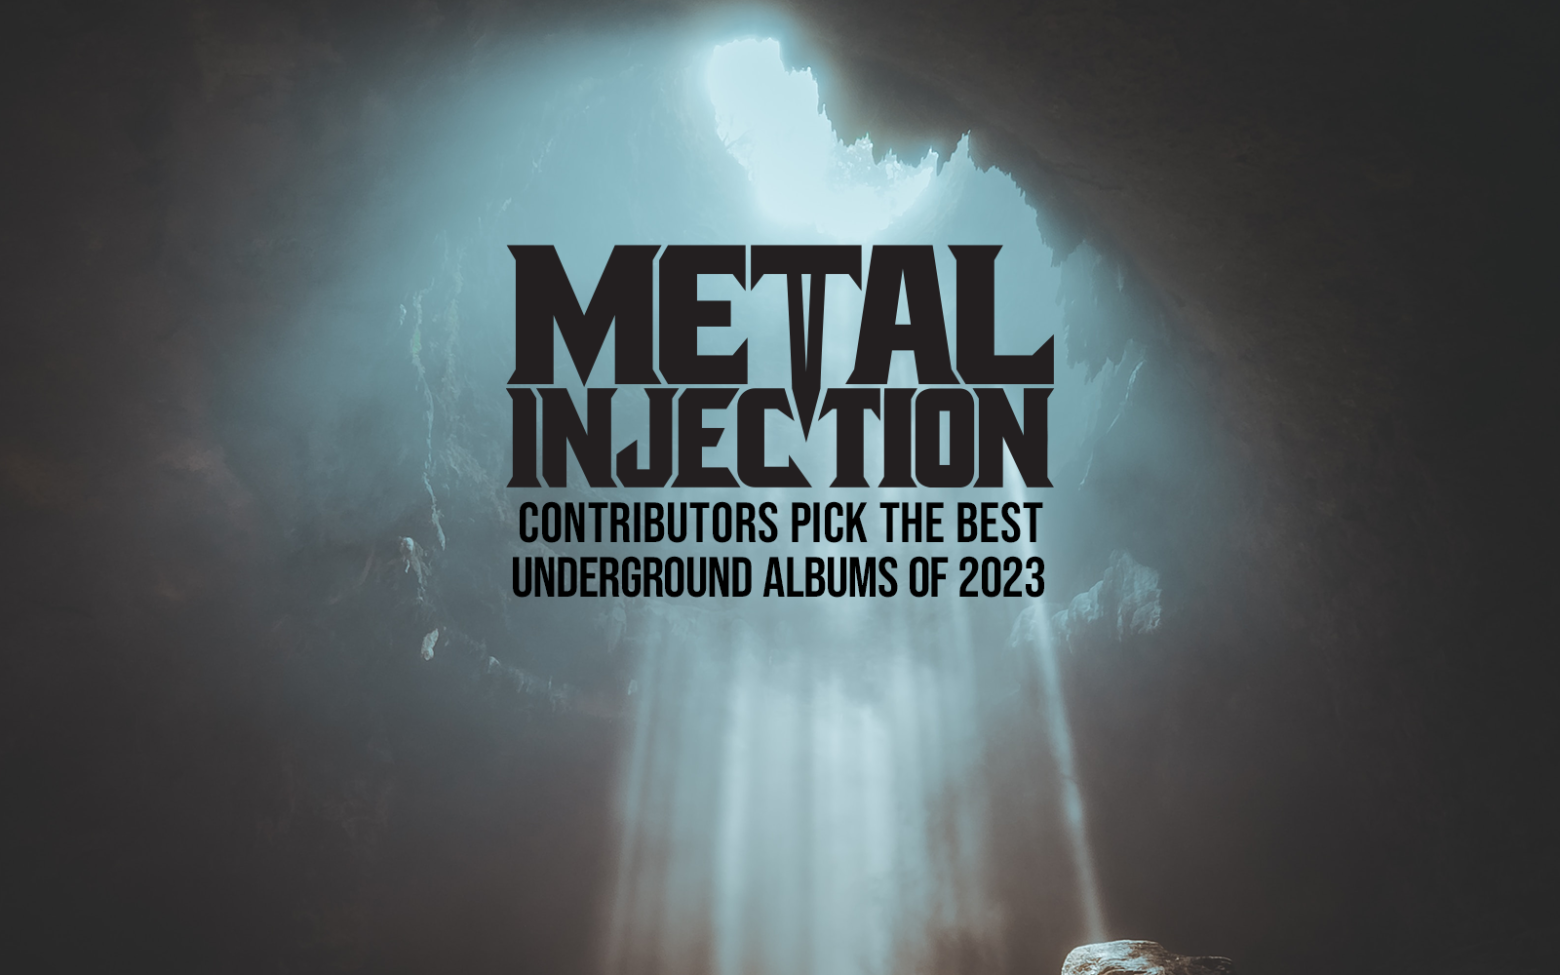 Metal Injection’s Contributors Pick The Best Underground Albums Of 2023